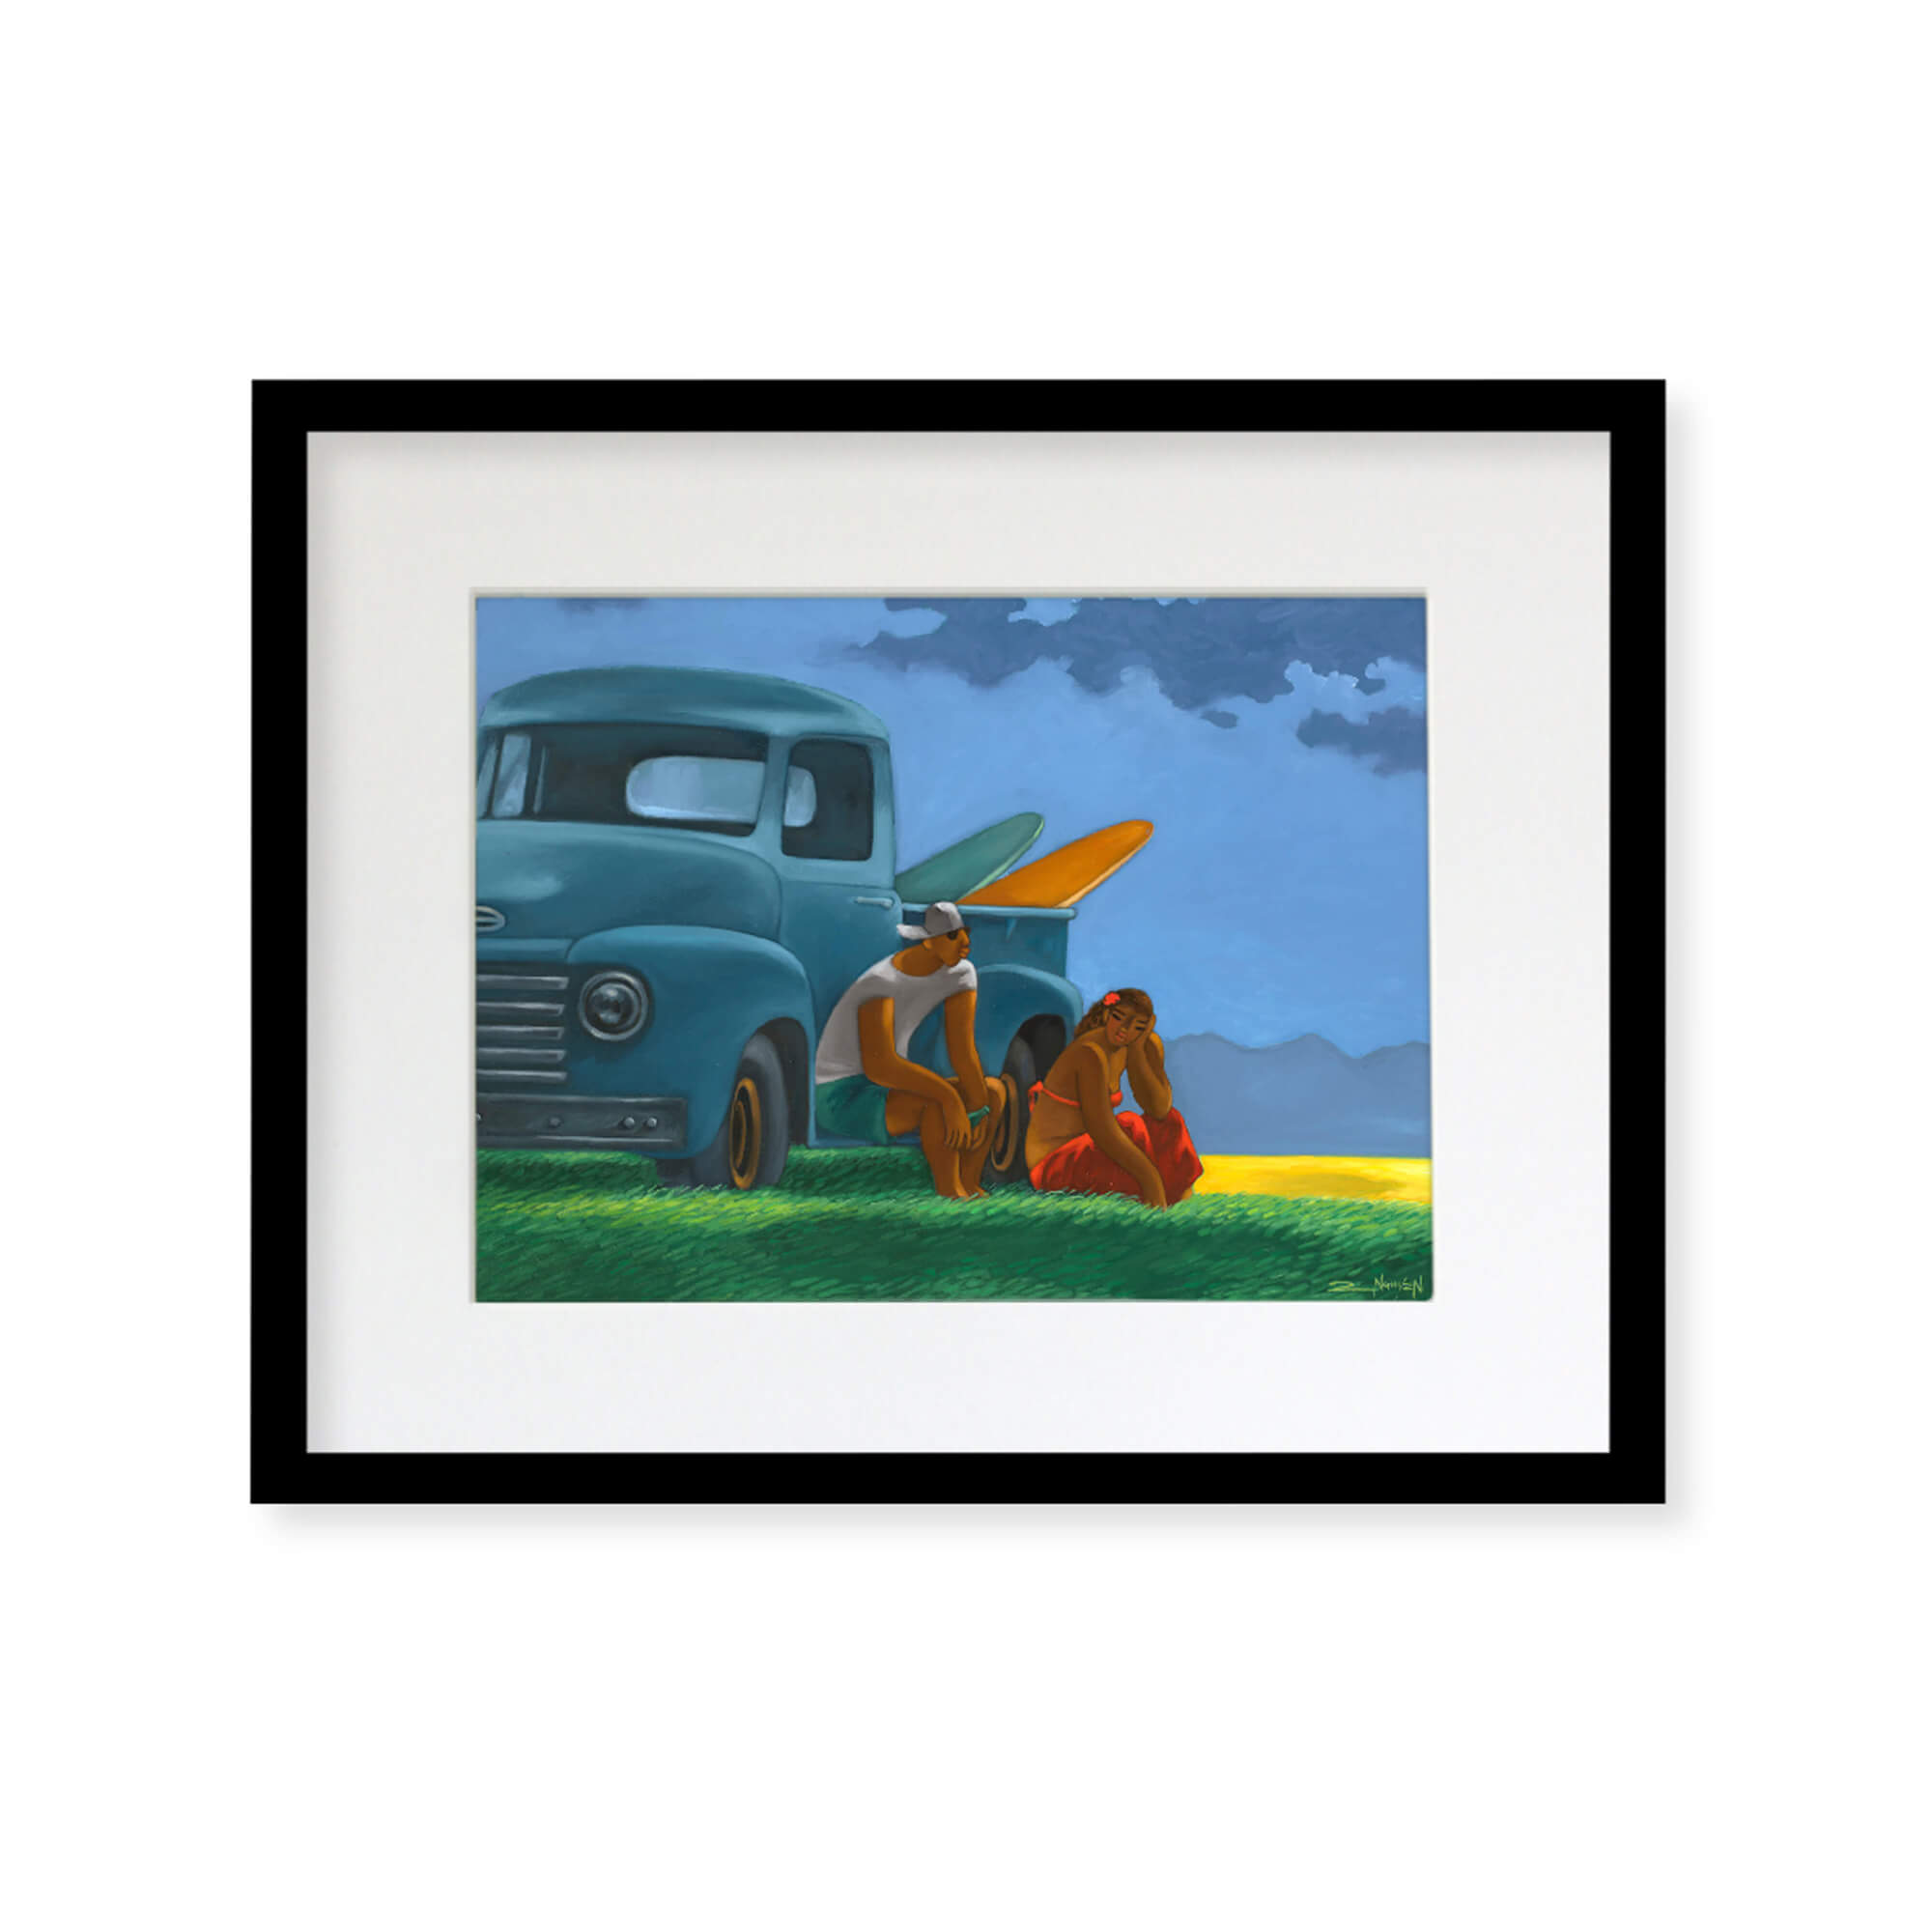 Framed matted art print of a couple with their surfboards and  vintage truck by Hawaii artist Tim Nguyen